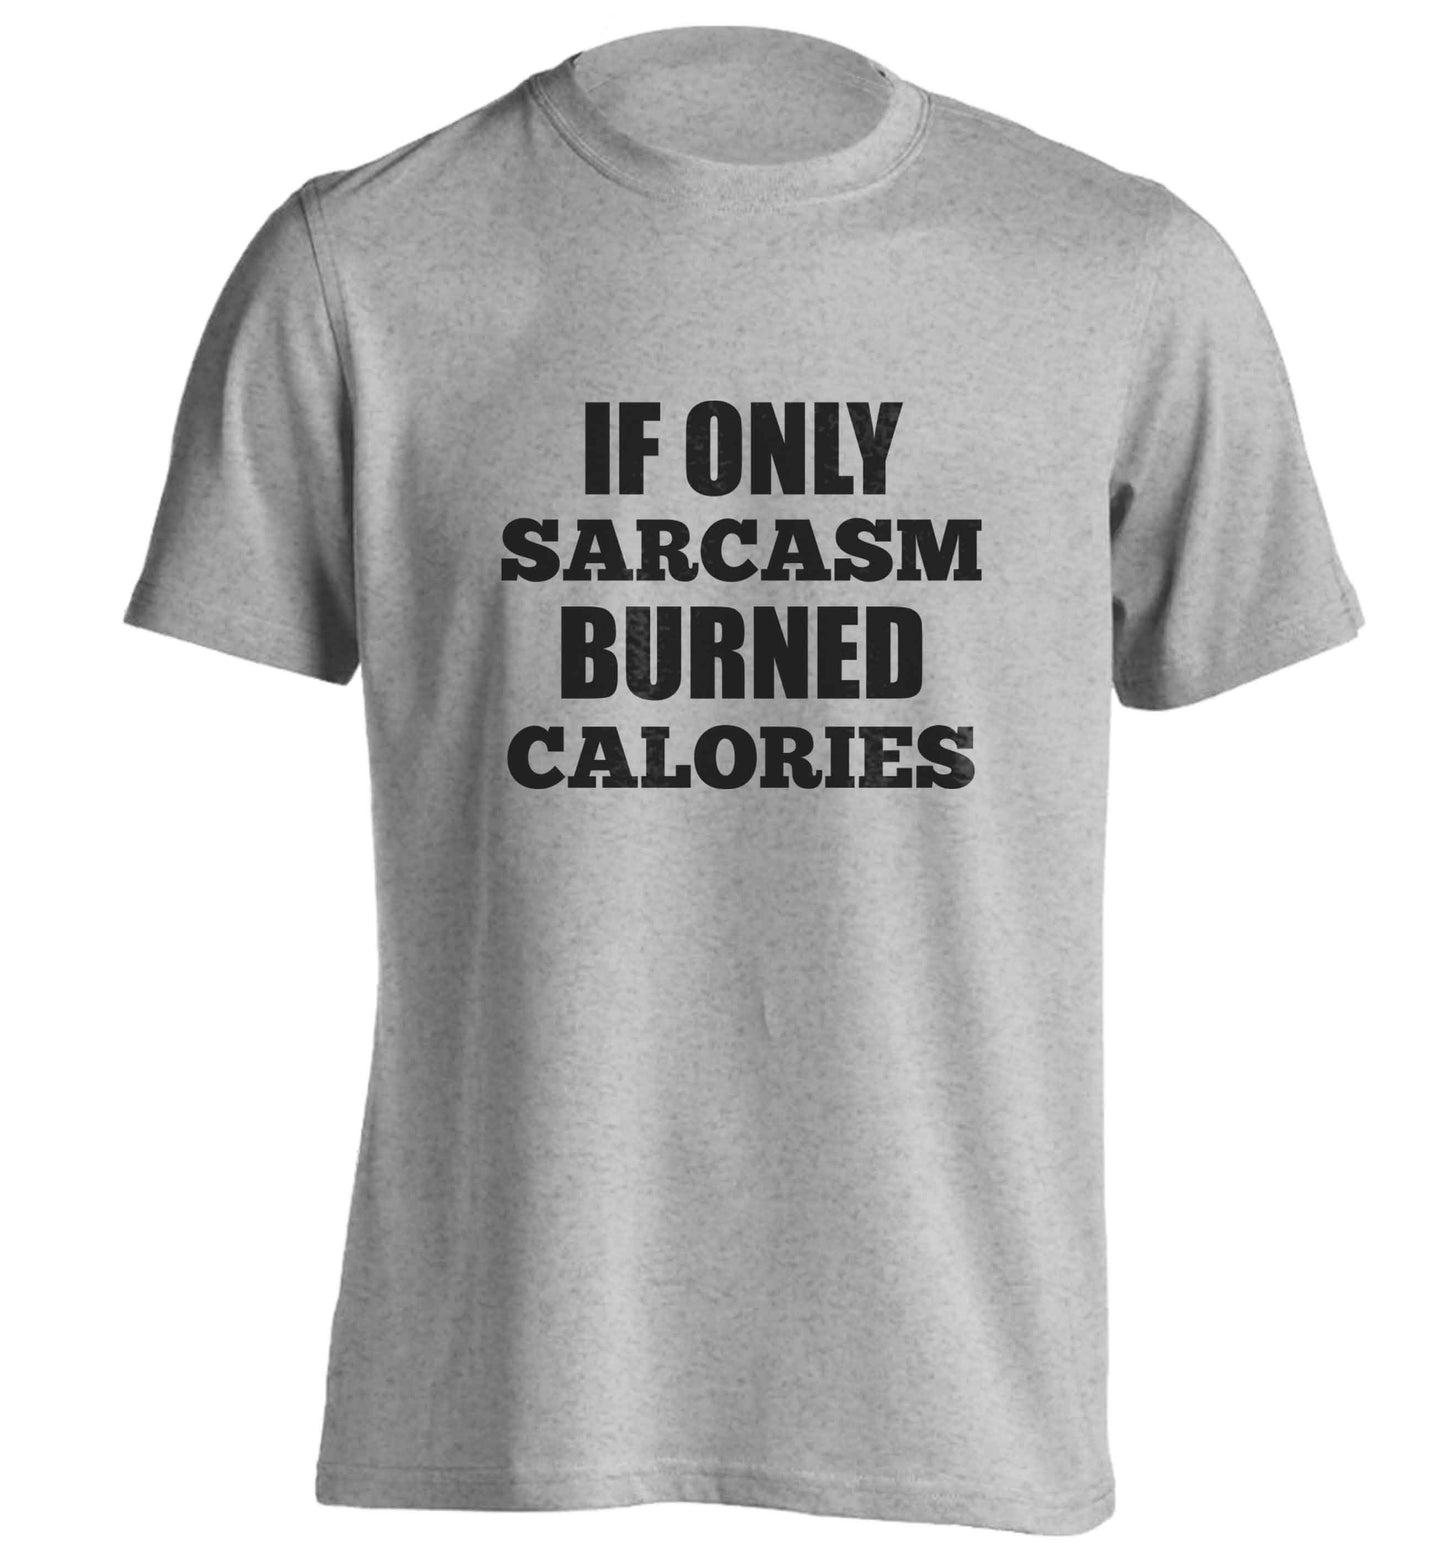 If only sarcasm burned calories adults unisex grey Tshirt 2XL